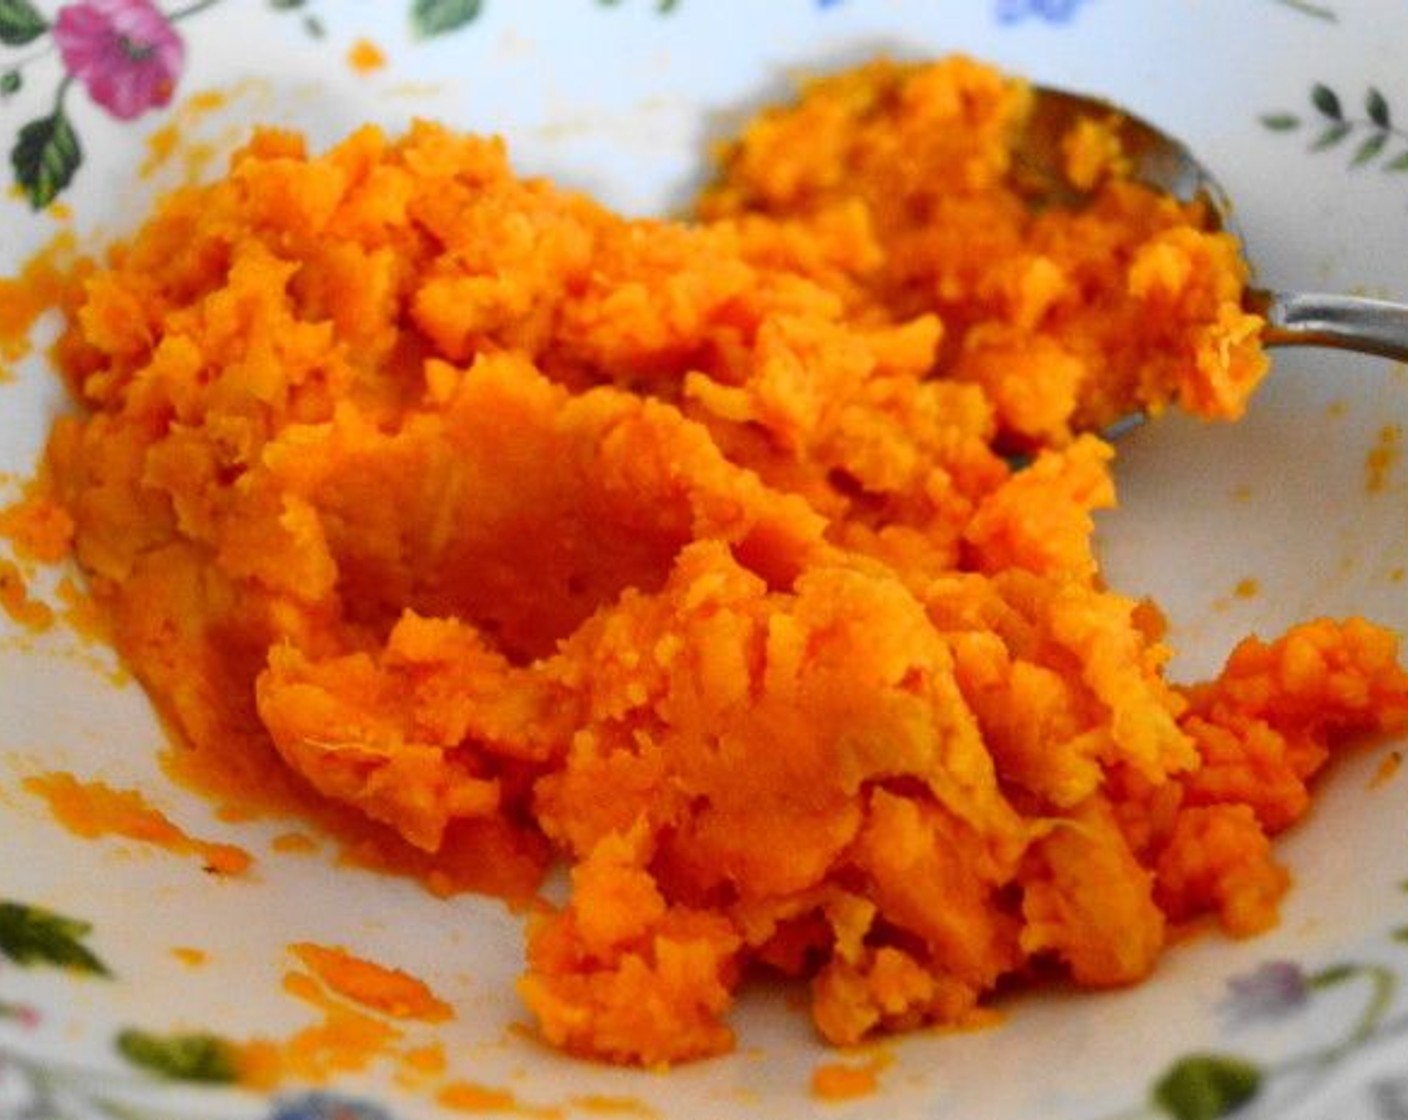 step 2 When it is cool enough to handle, cut the sweet potato in half and scoop the flesh right out of the skin into a bowl. Add the Maple Syrup (1/2 tsp) into the bowl and mash it all together well until smooth. Set the bowl aside so the sweet potato can cool completely.